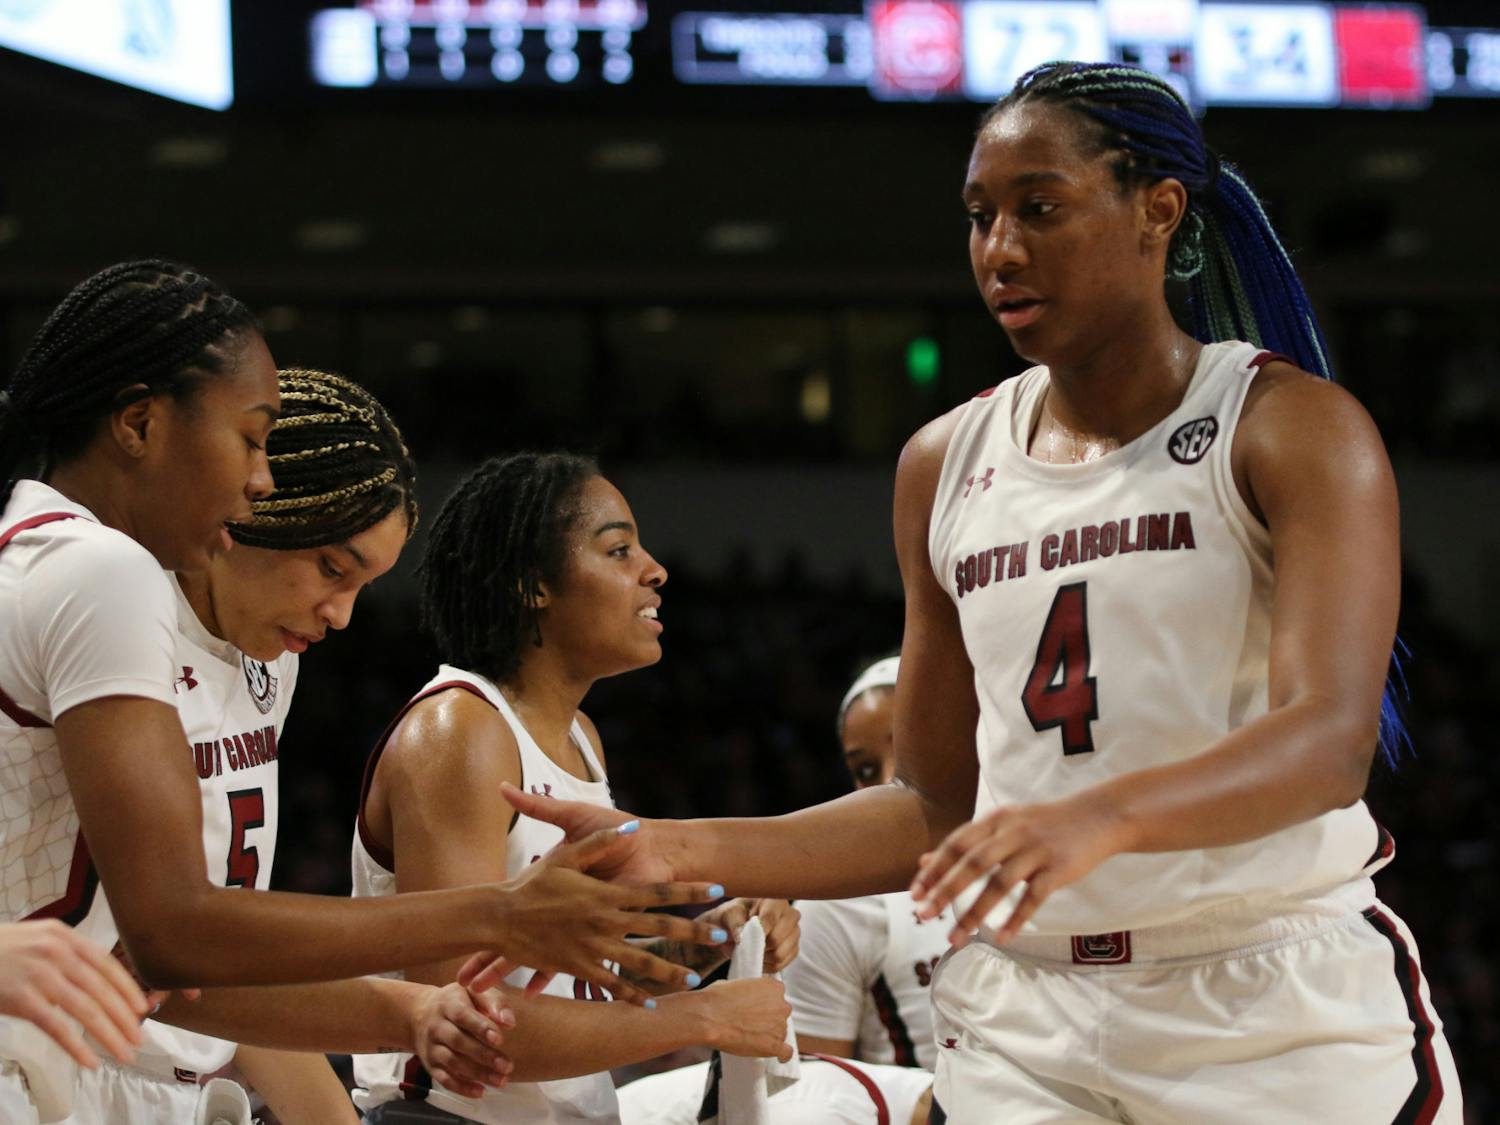 The South Carolina Gamecocks women's basketball team dominated the Arkansas Razorbacks 92-46 in a historic game at Colonial Life Arena in Columbia, SC, on Jan. 22, 2023. Senior forward Aliyah Boston recorded her 73rd double-double, the most in Gamecock women's basketball history, and the Gamecocks are now 8-0 in the SEC, having defeated every opponent they've faced this season.&nbsp;